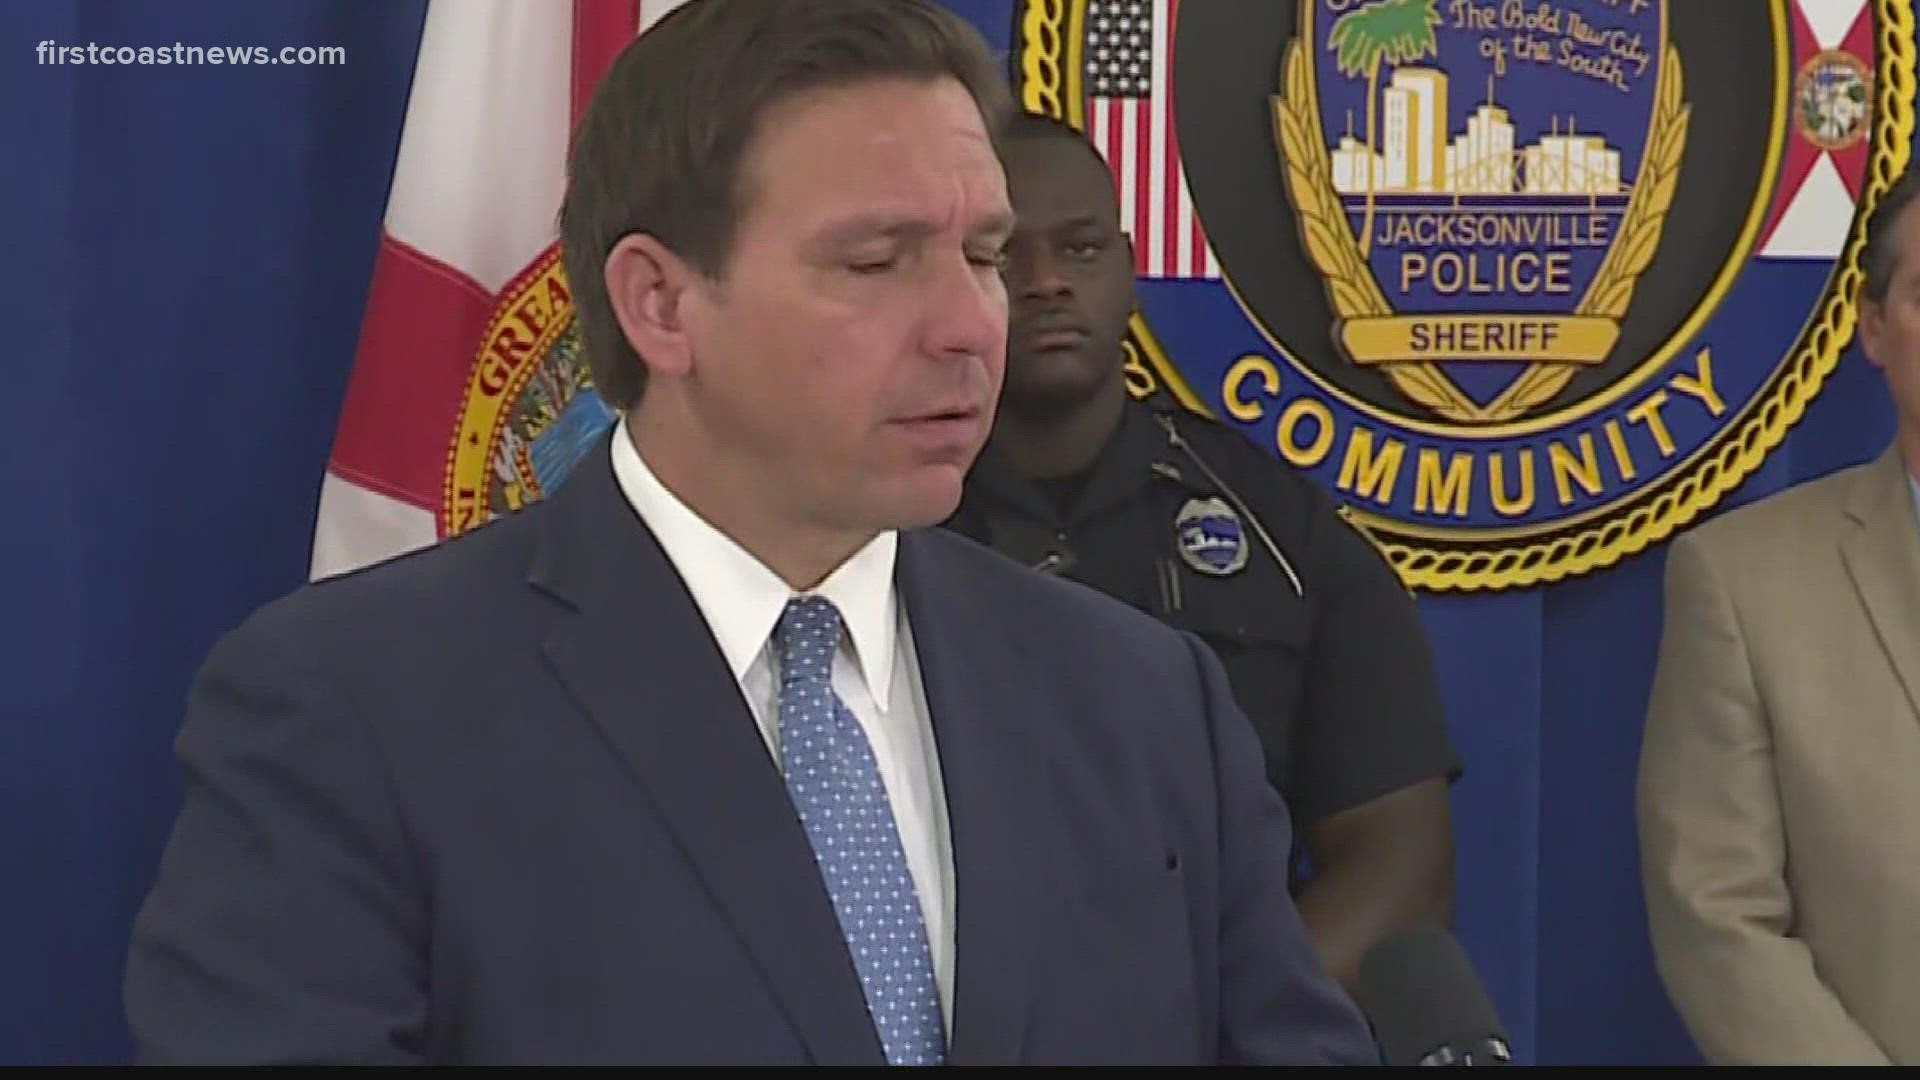 DeSantis said he was unaware of the healthcare community calling for help to deal with volume of COVID-19 patients.